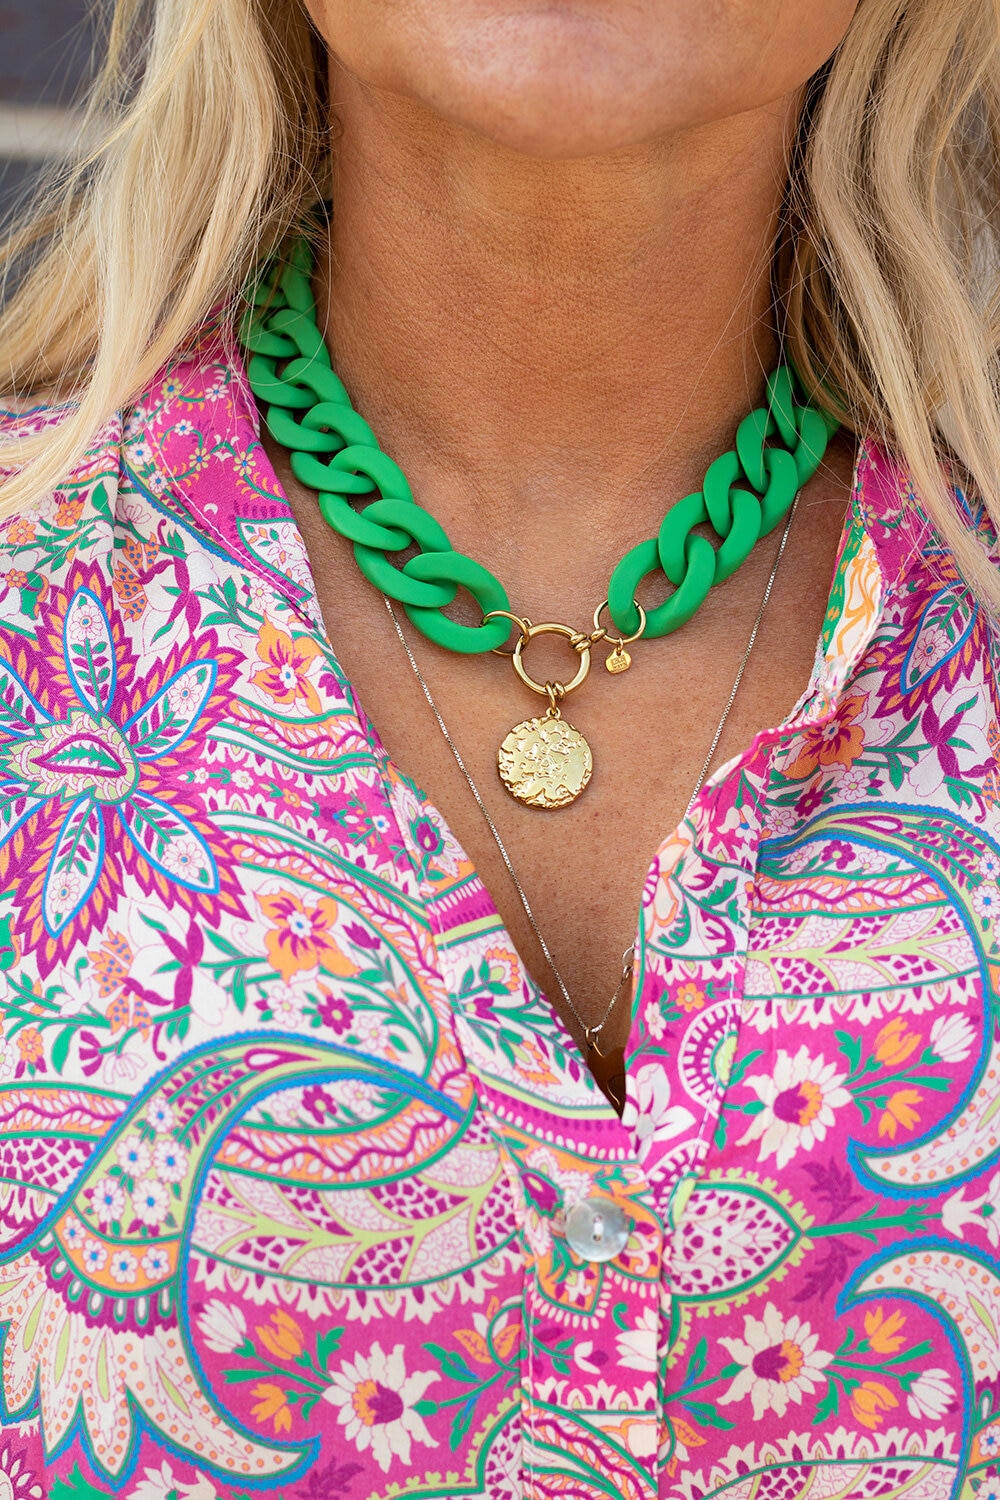 Necklace - Wide chain - Green